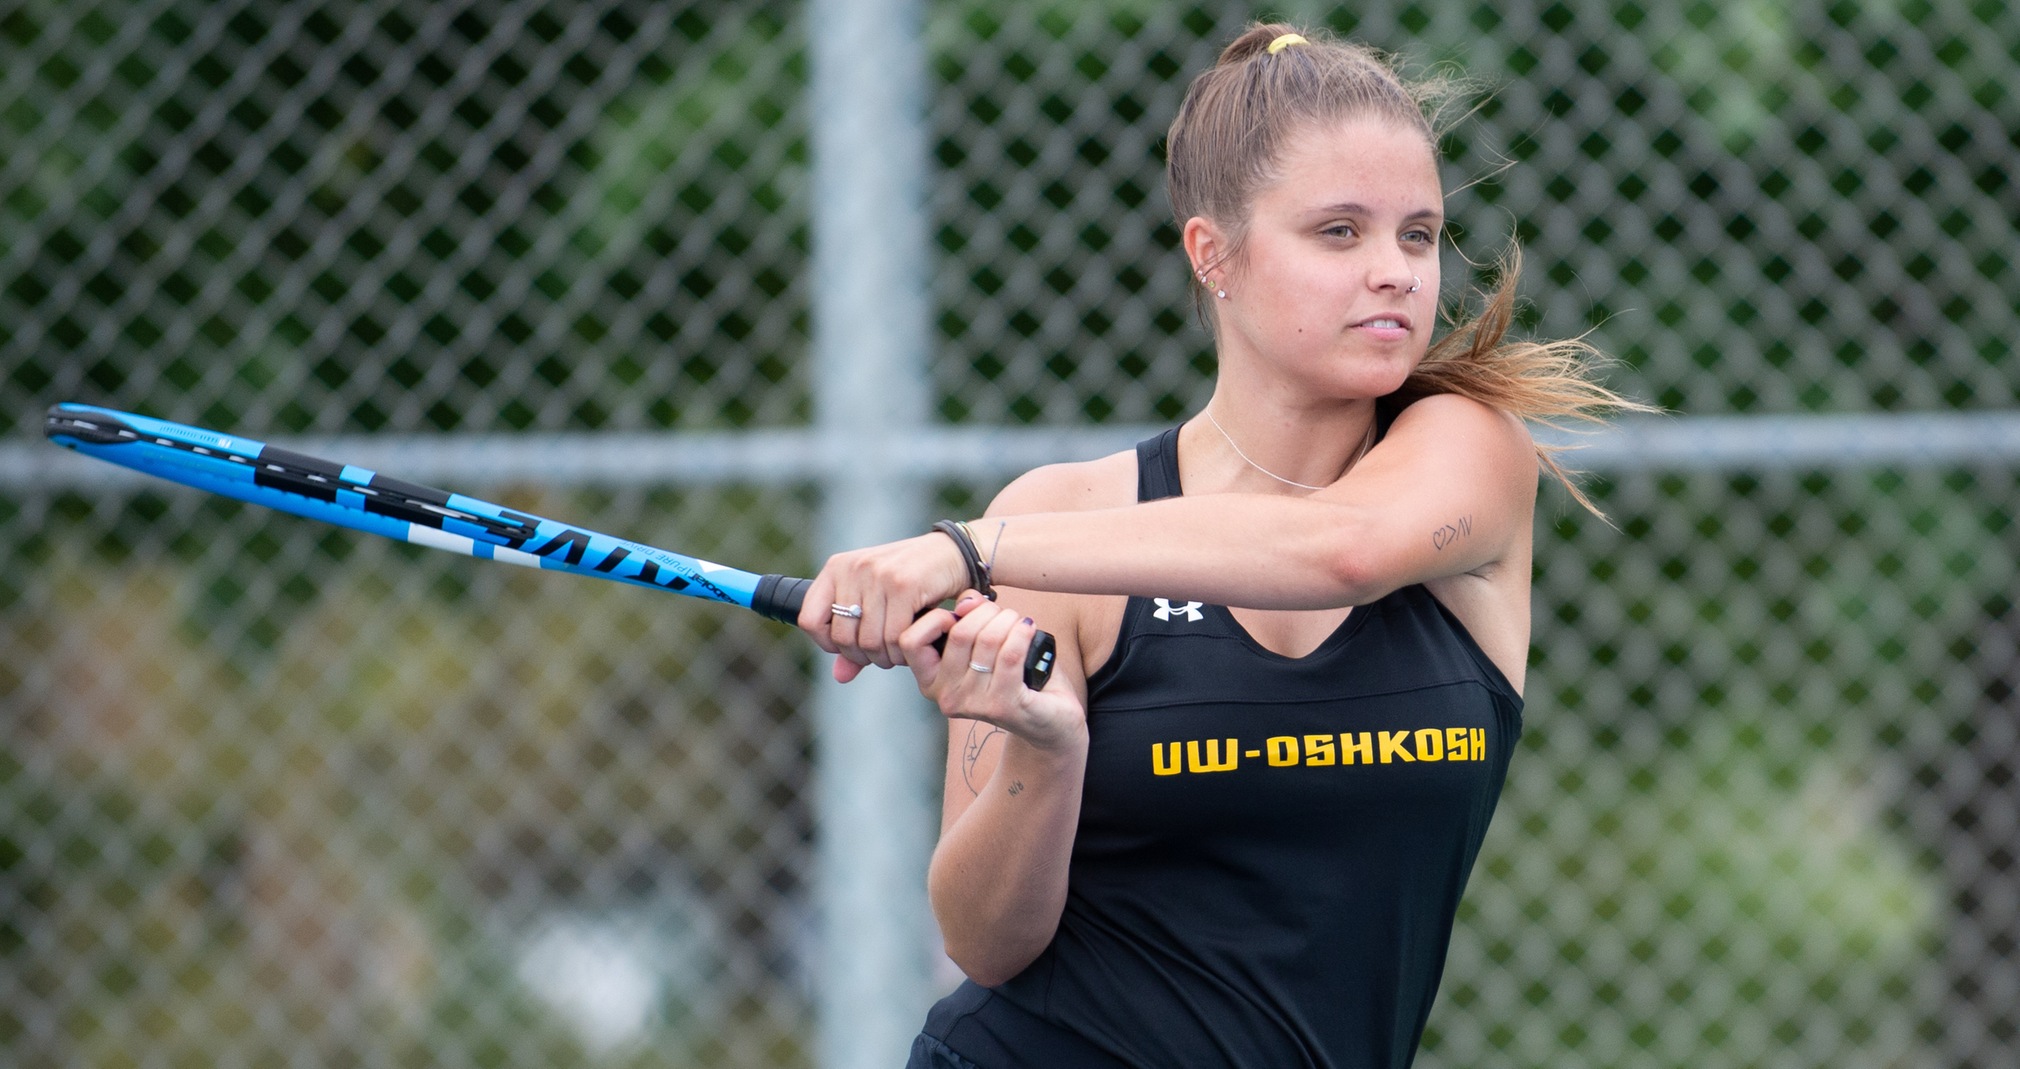 Ashlee Polena won her No. 6 singles contest over the Boxers' Megan Meatte.